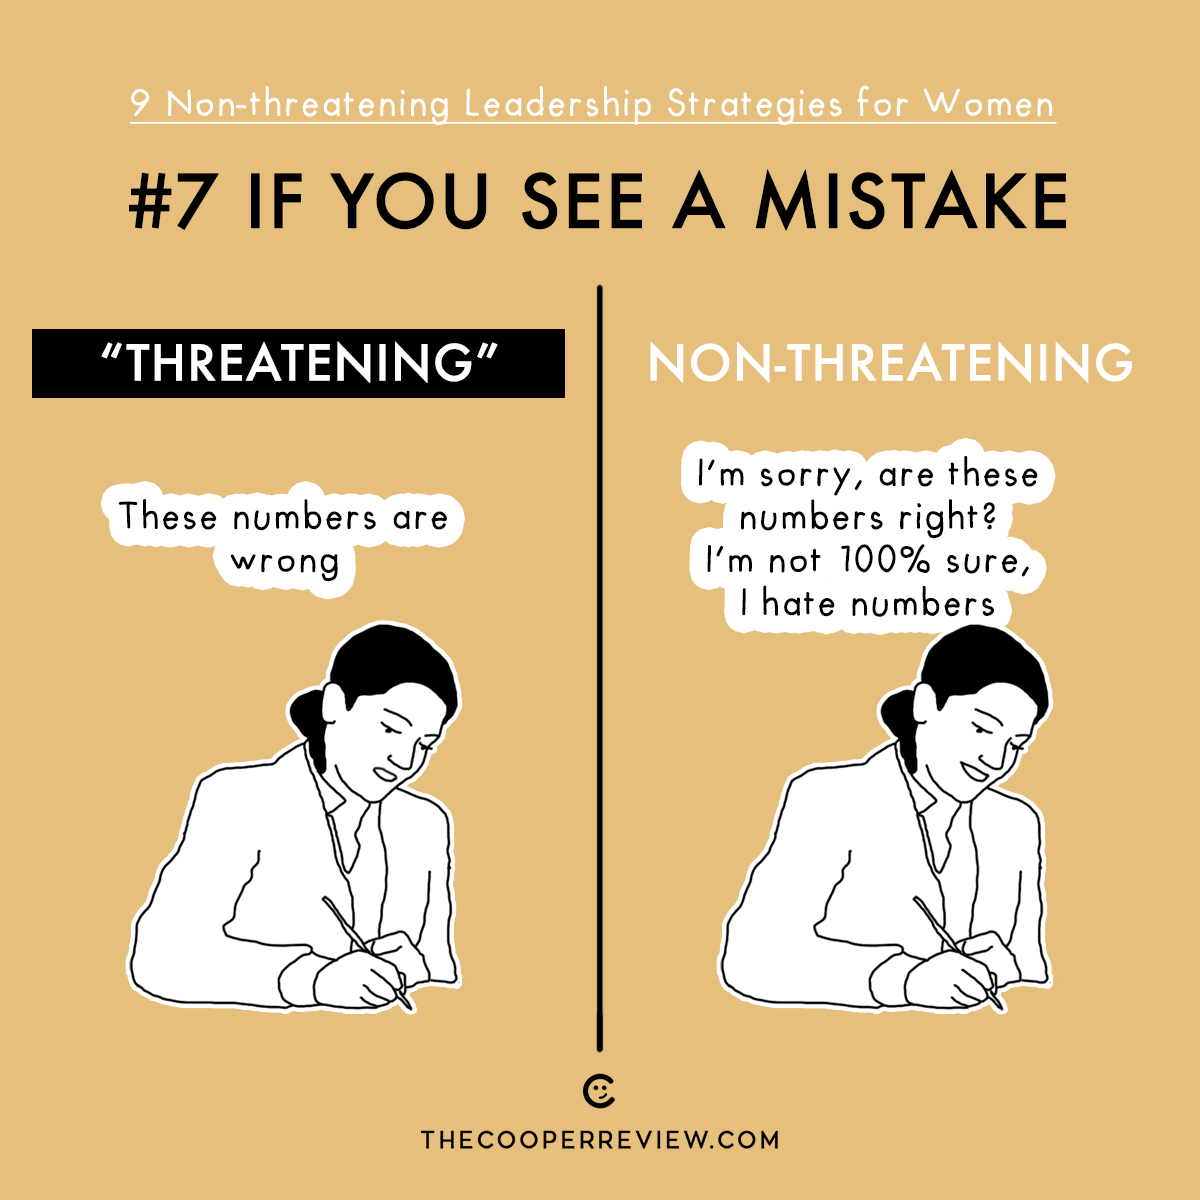 #7 If You See a Mistake. Threatening: These numbers are wrong. Non-threatening: I'm sorry, are these numbers right? I'm not 100% sure. I hate numbers.